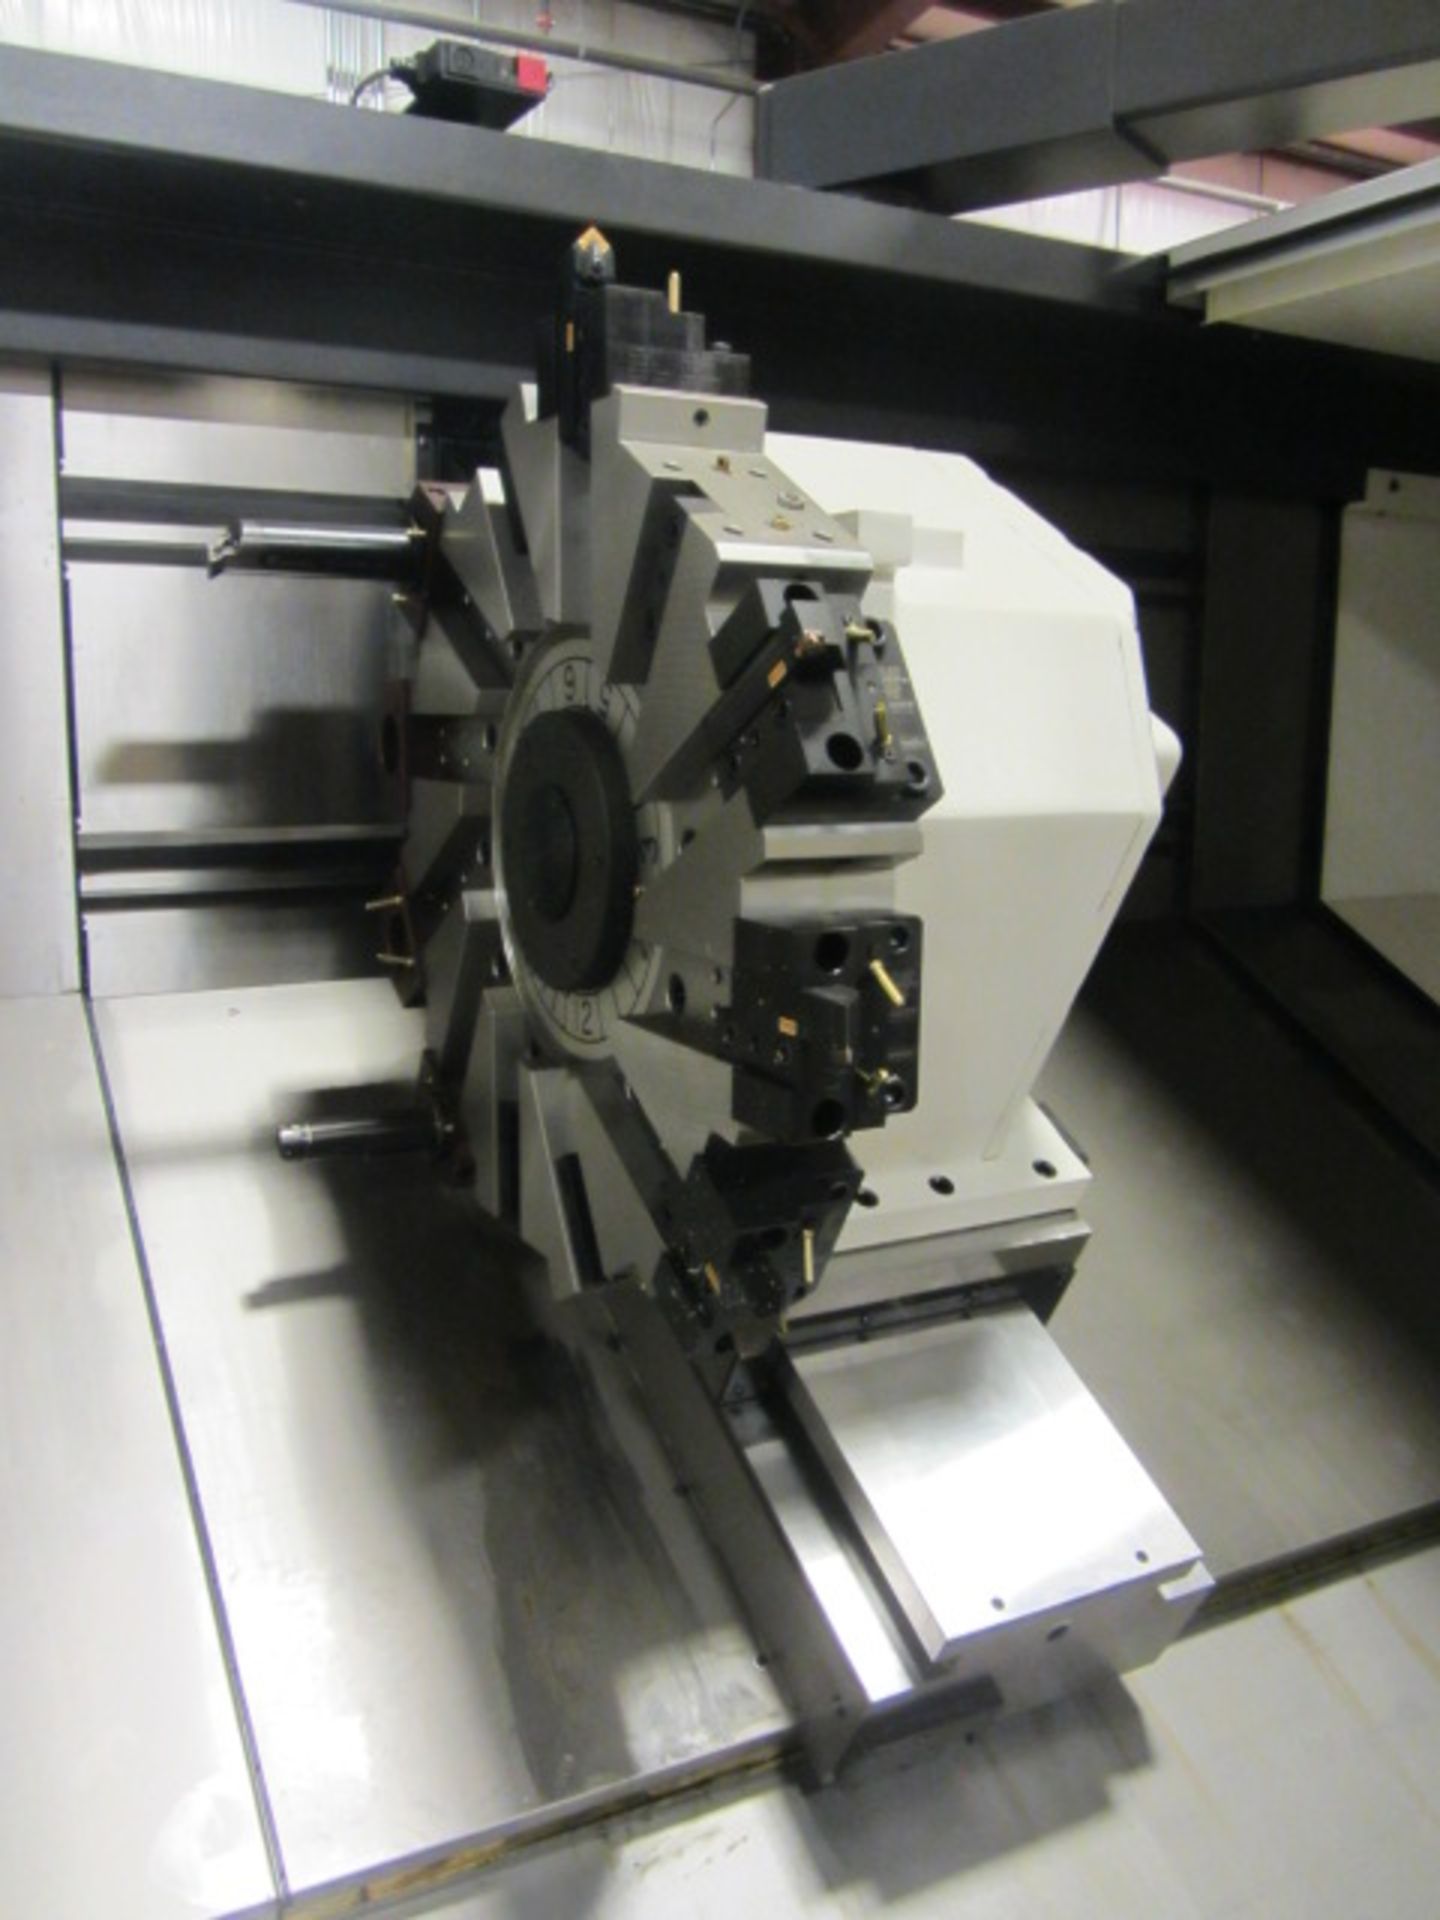 Okuma Model LB45II C2000 Hollow Spindle CNC Turning Center with Dual Front & Rear 24'' 4-Jaw Chucks, - Image 7 of 14